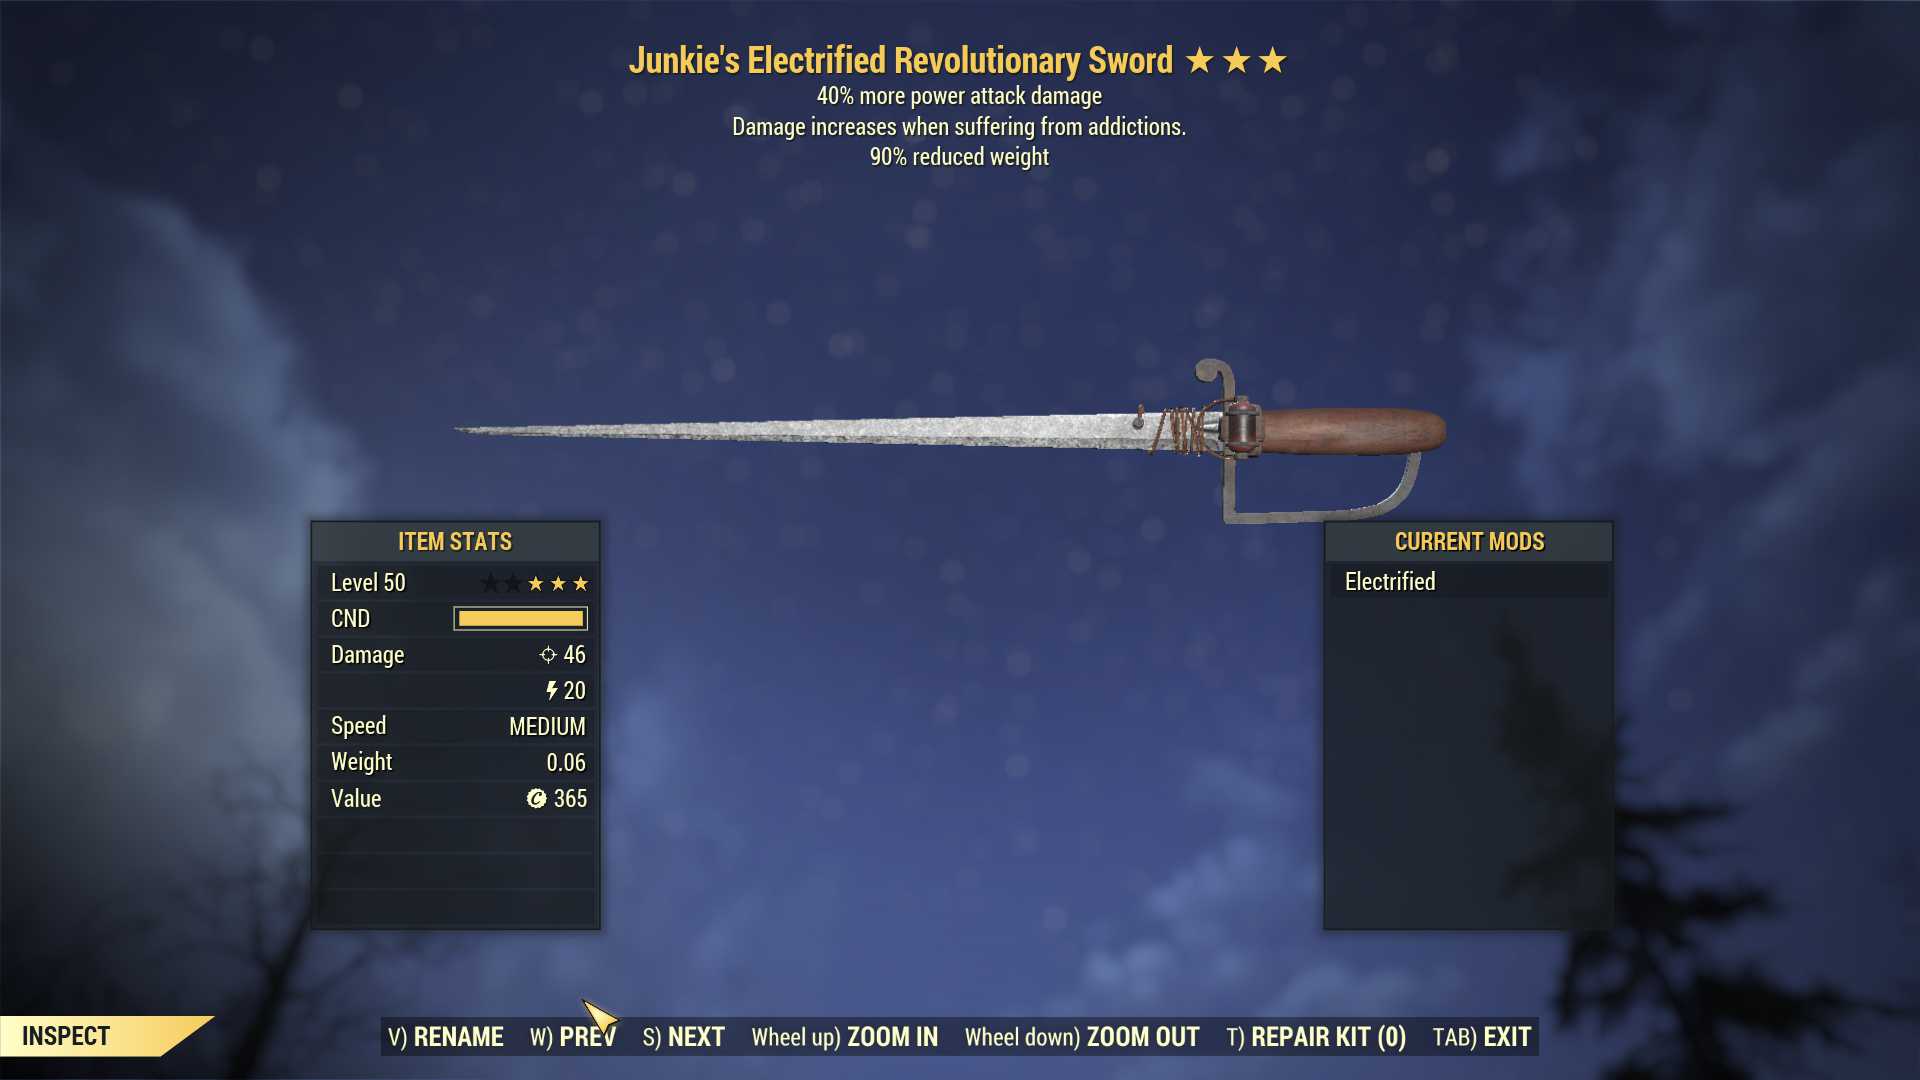 Junkie's Revolutionary Sword (+40% damage PA, 90% reduced weight)